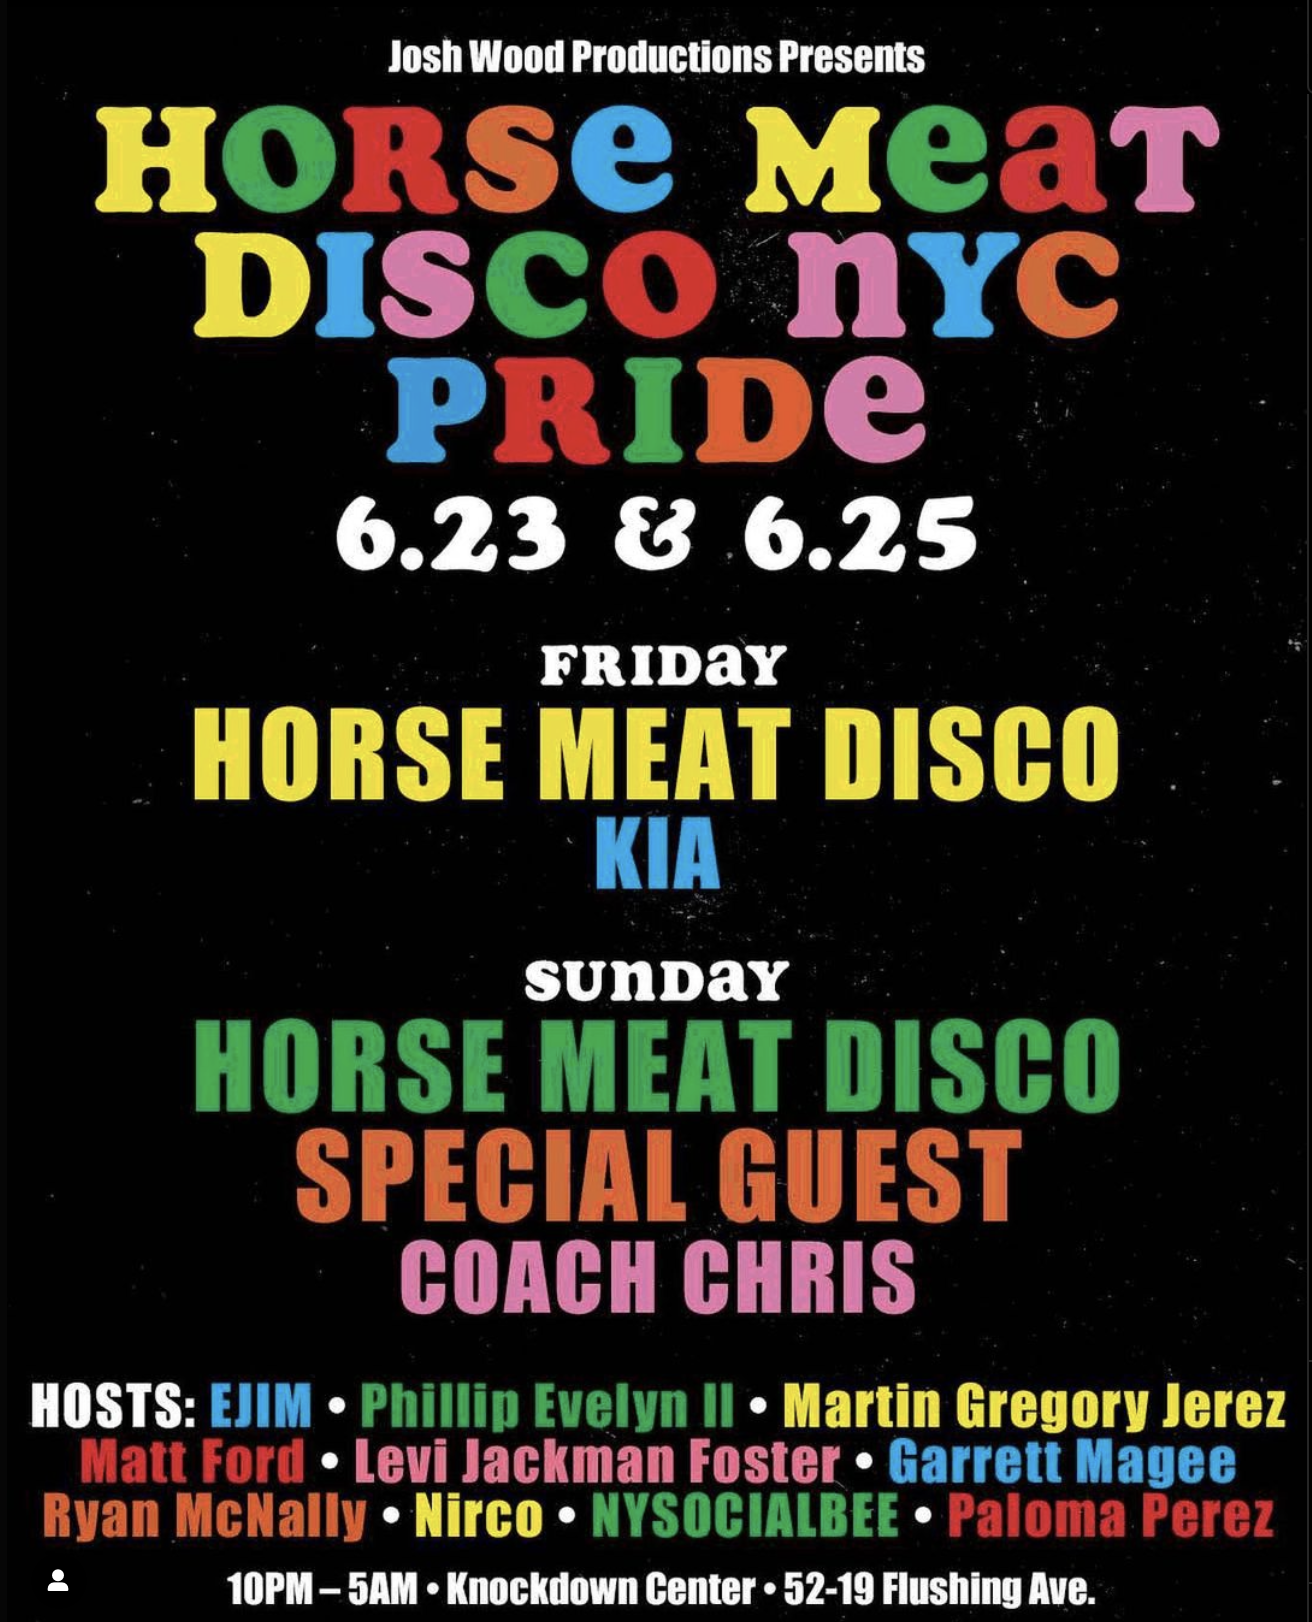 Horse Meat Disco NYC Pride (Sunday Night) Circuit Party Info